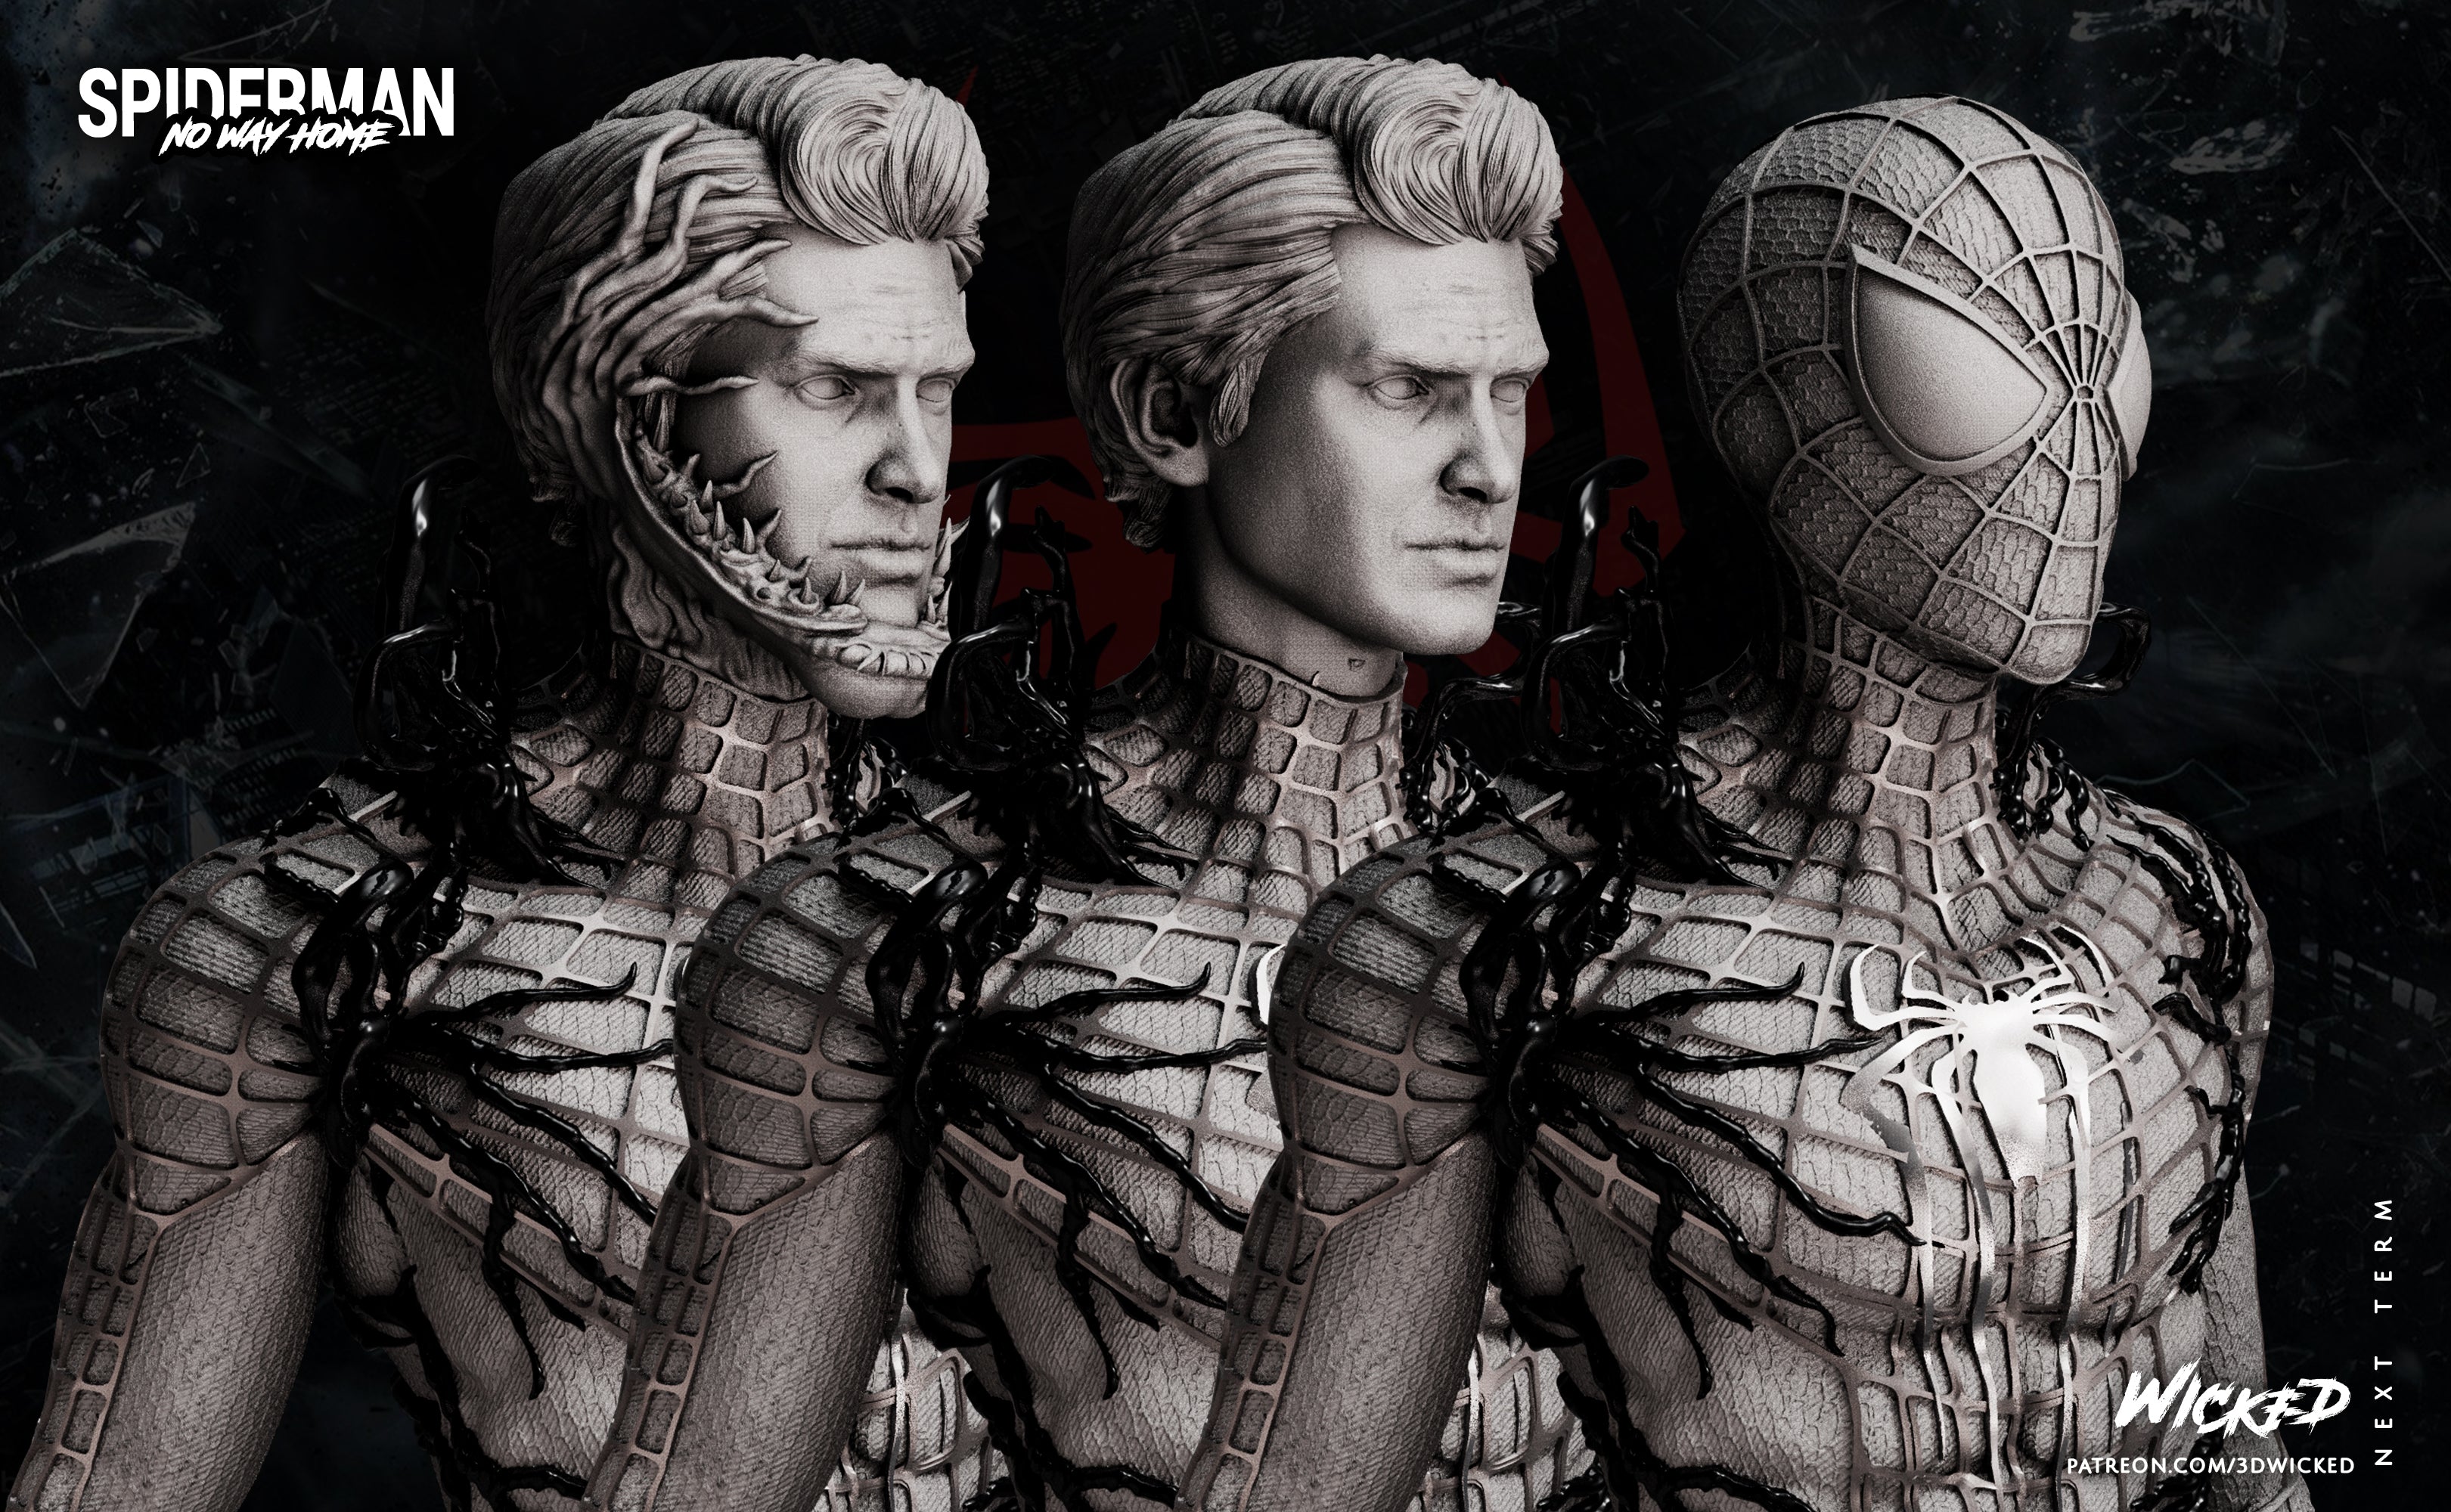 Spiderman (Andrew Garfield) Fan Art Bust - 4 or 8 scale (260mm or 130mm) - 3D Print